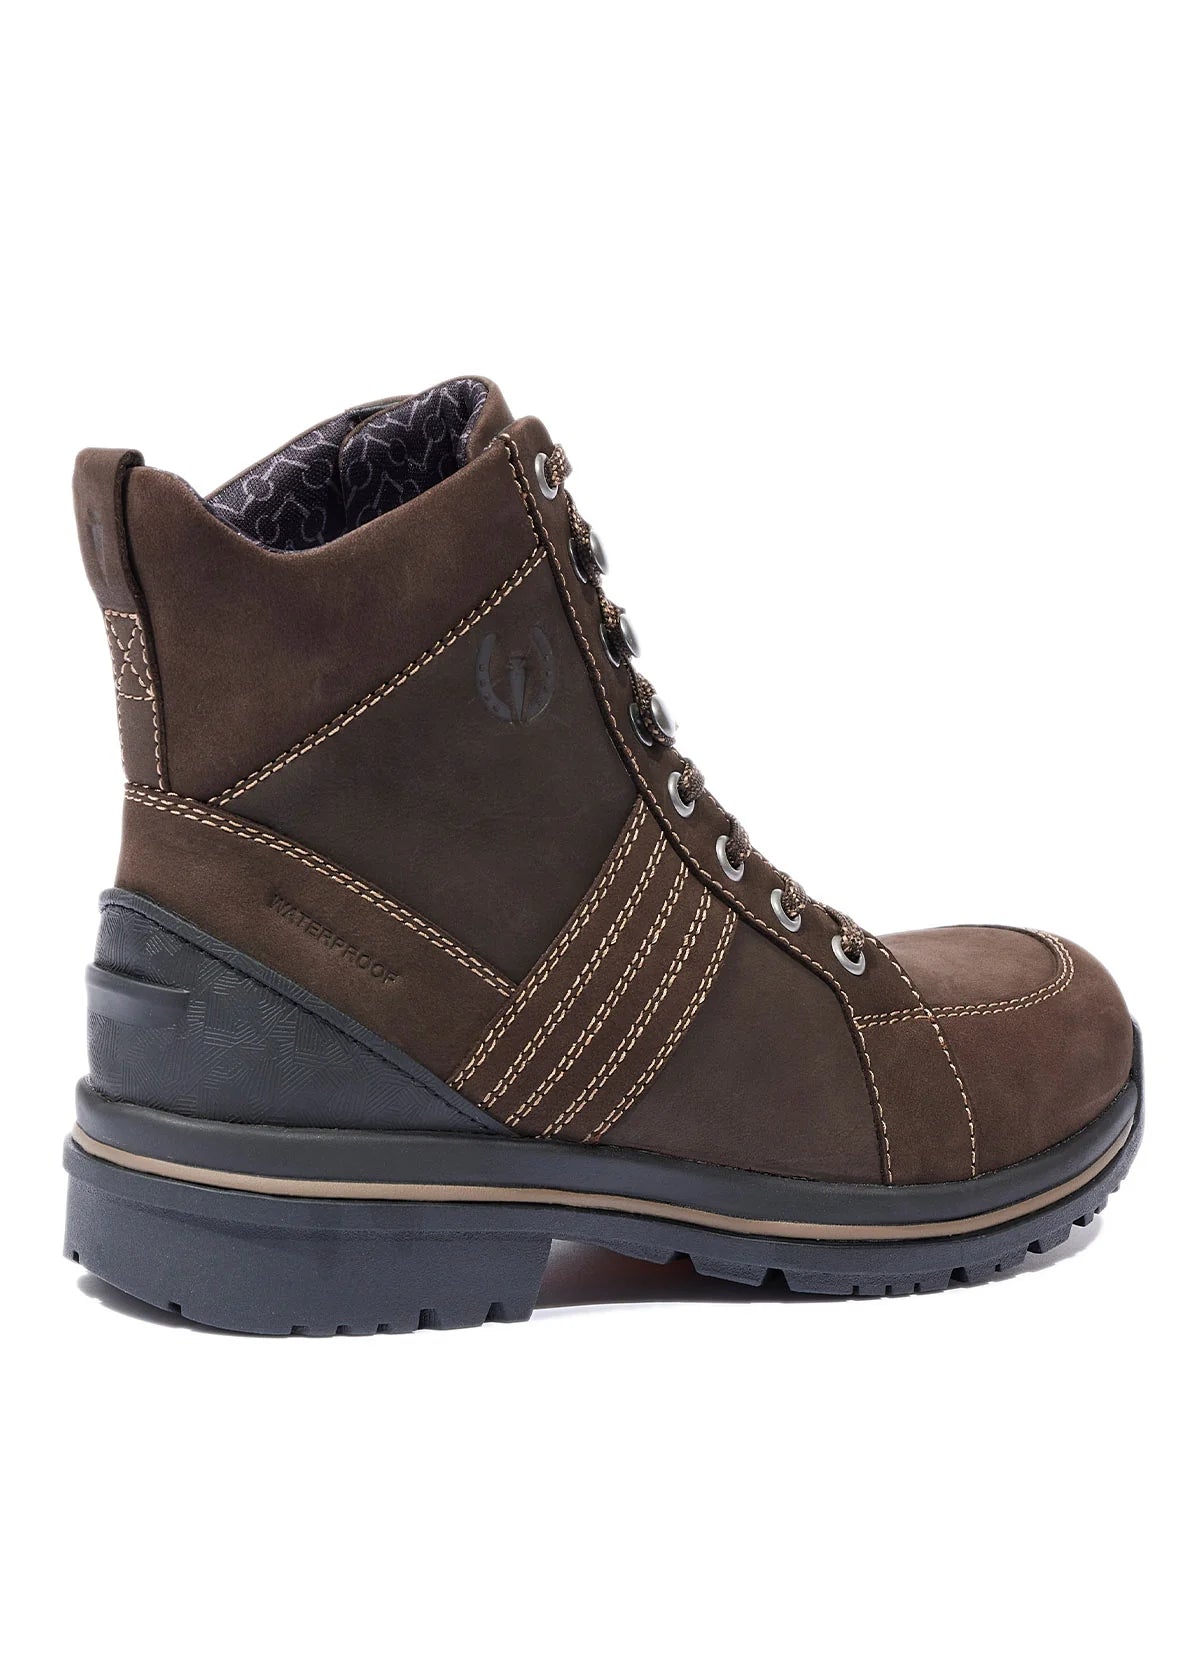 Kerrits Trail Blazer Waterproof Lace Up Barn Boots - Equine Exchange Tack Shop